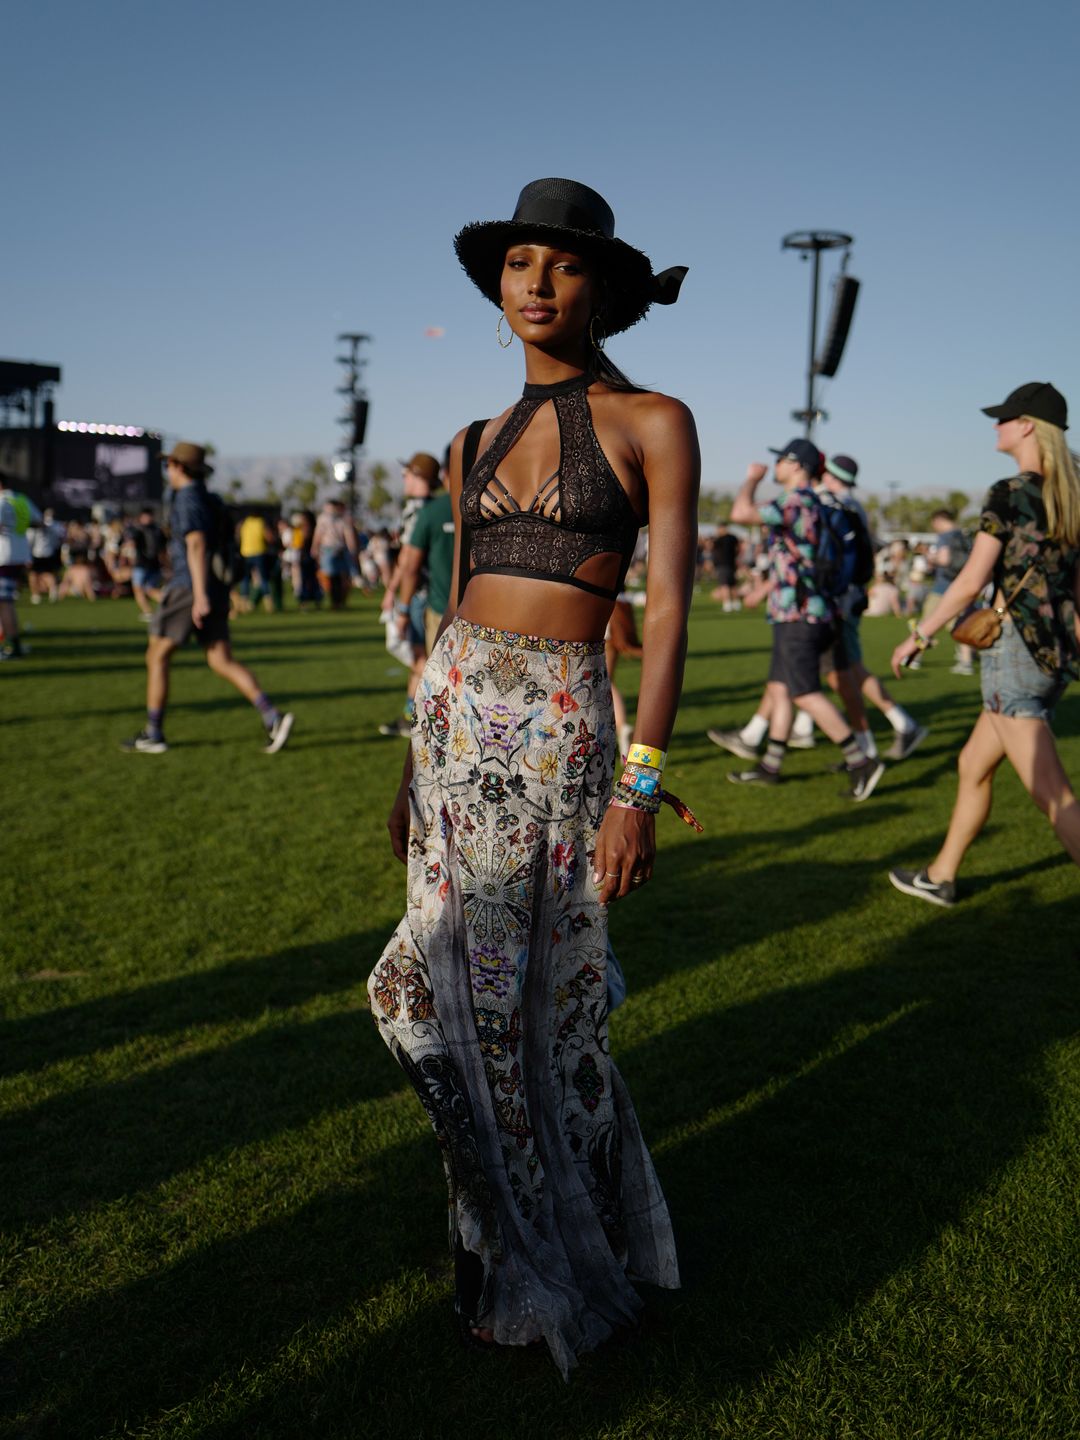 INDIO, CA - APRIL 13: Jasmine Tookes wearing a Victoria Secret BH during day 1 of the 2018 Coachella Valley Music & Arts Festival Weekend 1 on April 13, 2018 in Indio, California. (Photo by Jeremy Moeller/GC Images)